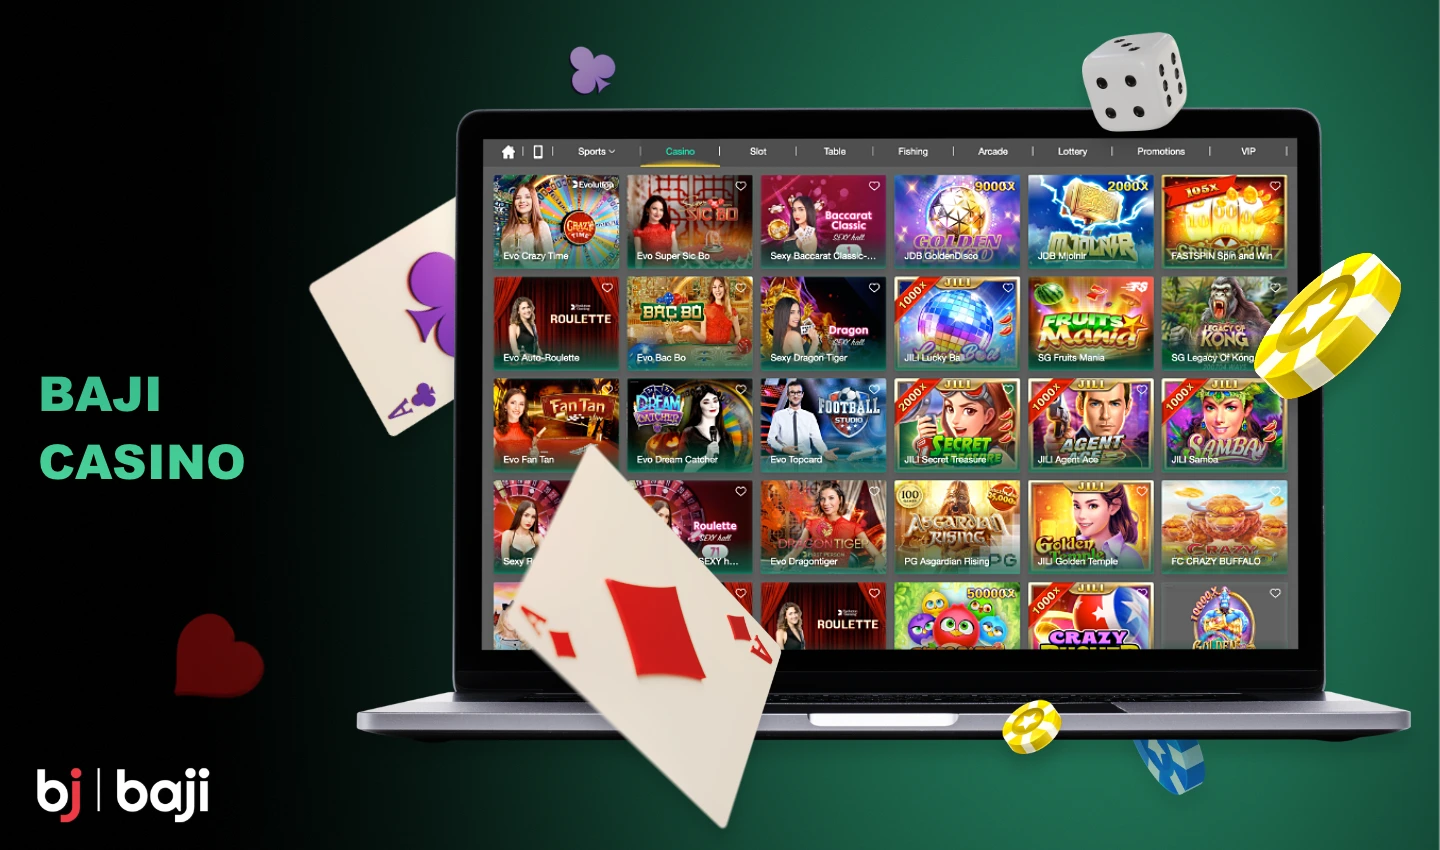 Baji Casino will delight its users with a huge variety of gambling games from famous vendors